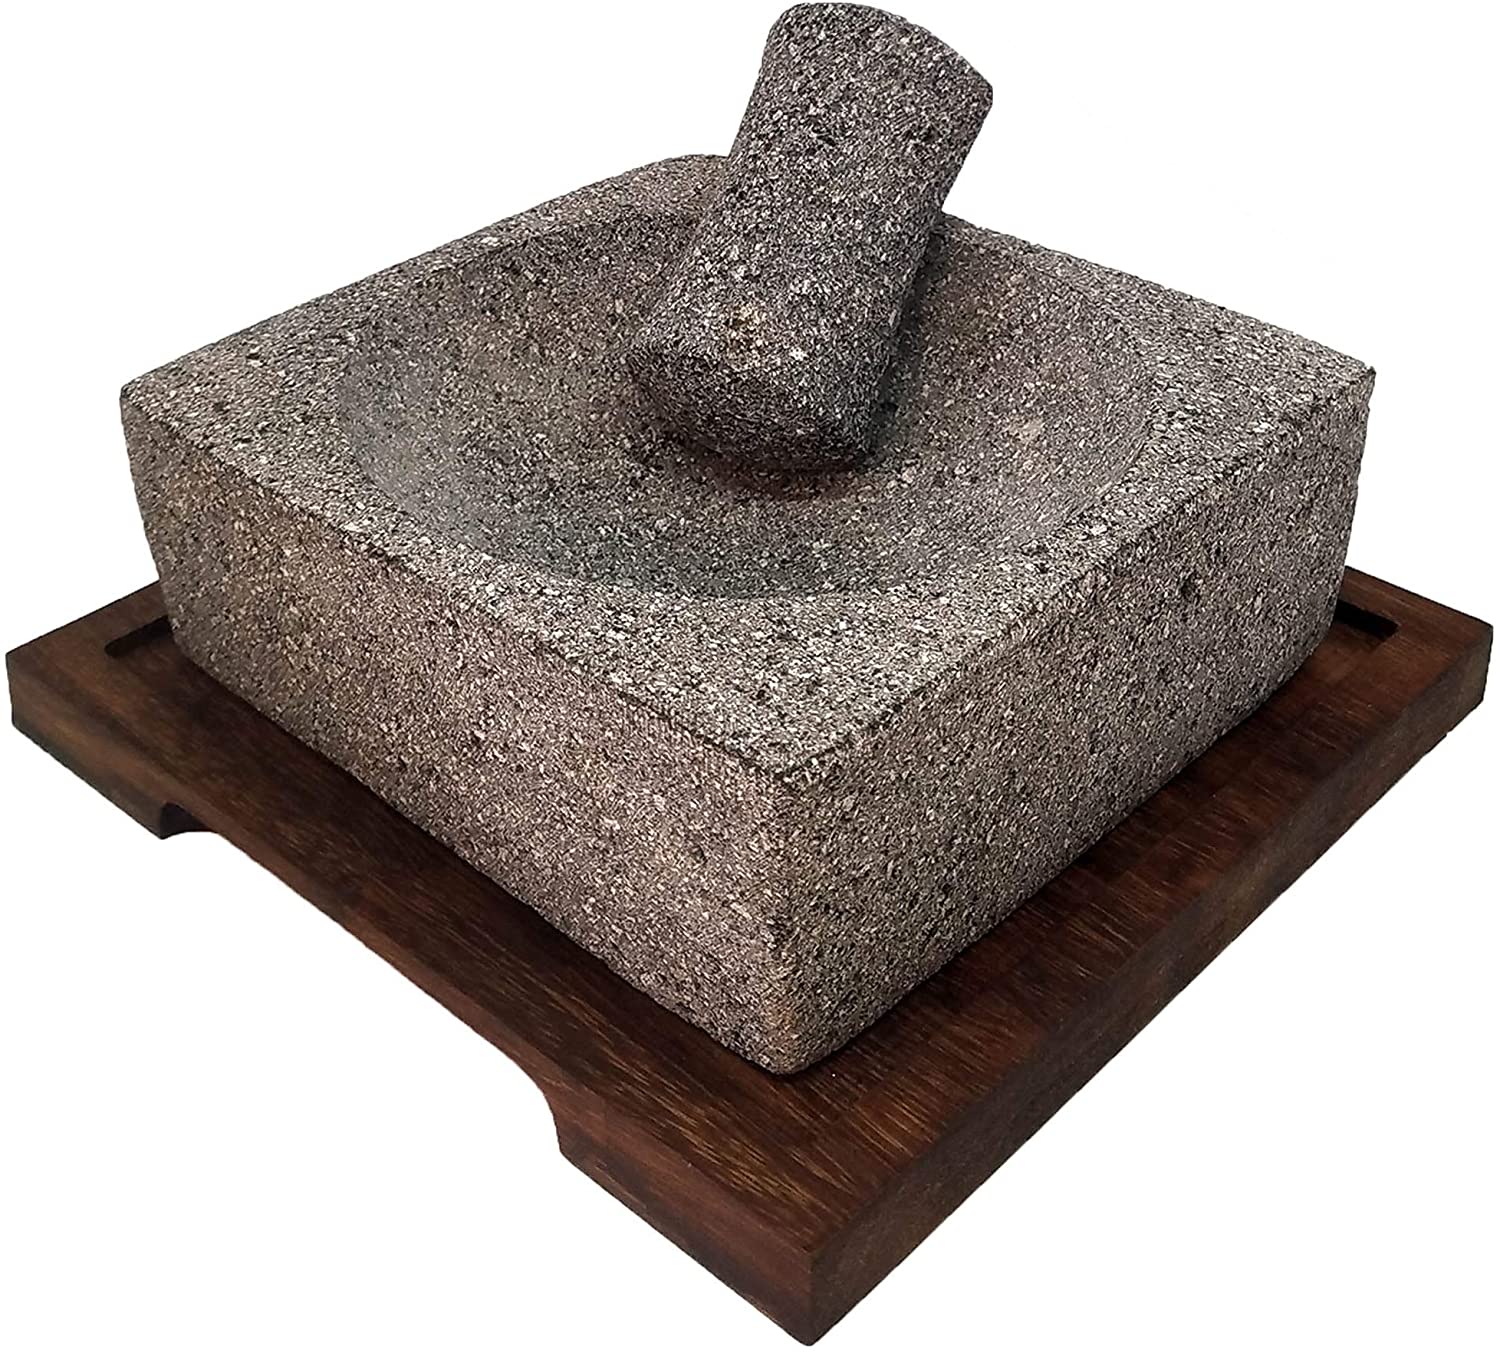 VOLCANIC ROCK PRODUCTS / 8'' Square Mortar and Pestle Set with Parota Wood Serving Board / Sturdy and eye-catching, this large square mortar will be a great addition to your kitchen.